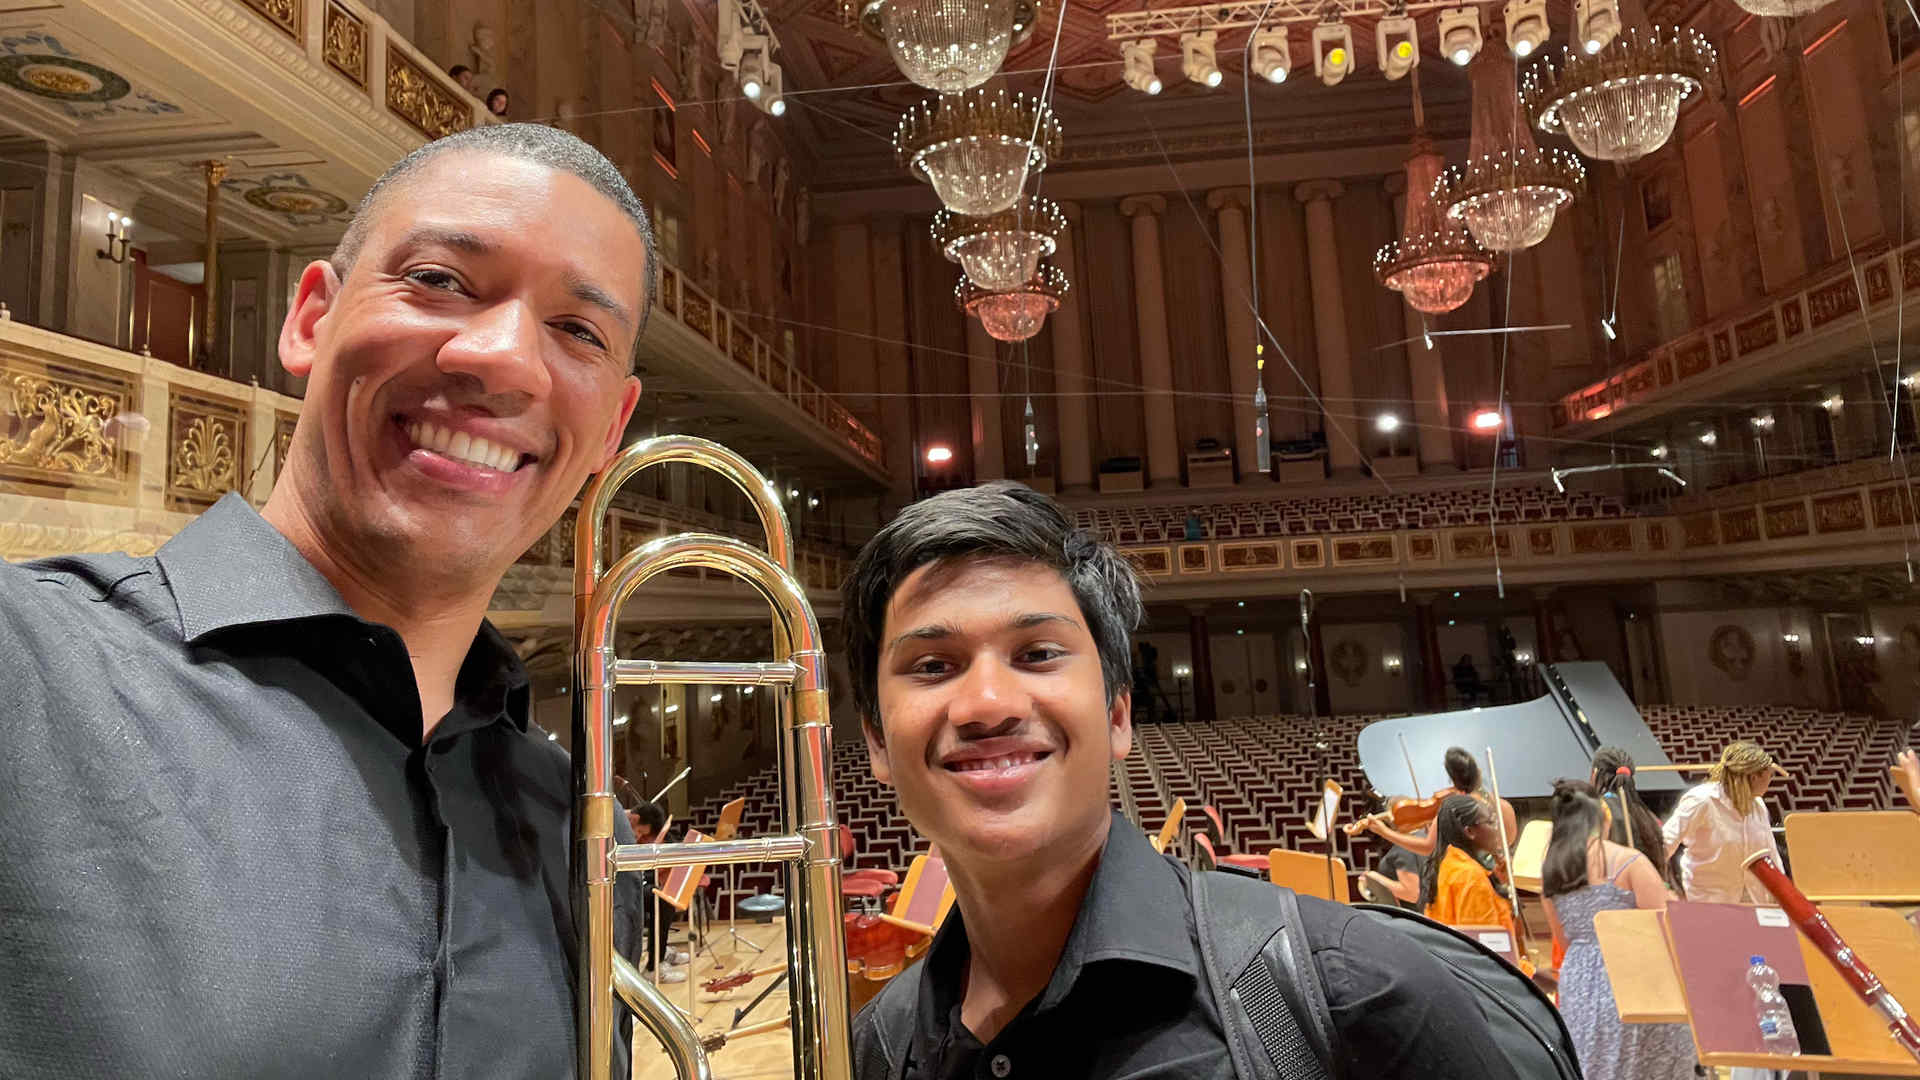 Sprott and Batchu pose for a selfie in a concert hall. They are holding their instruments and smiling.